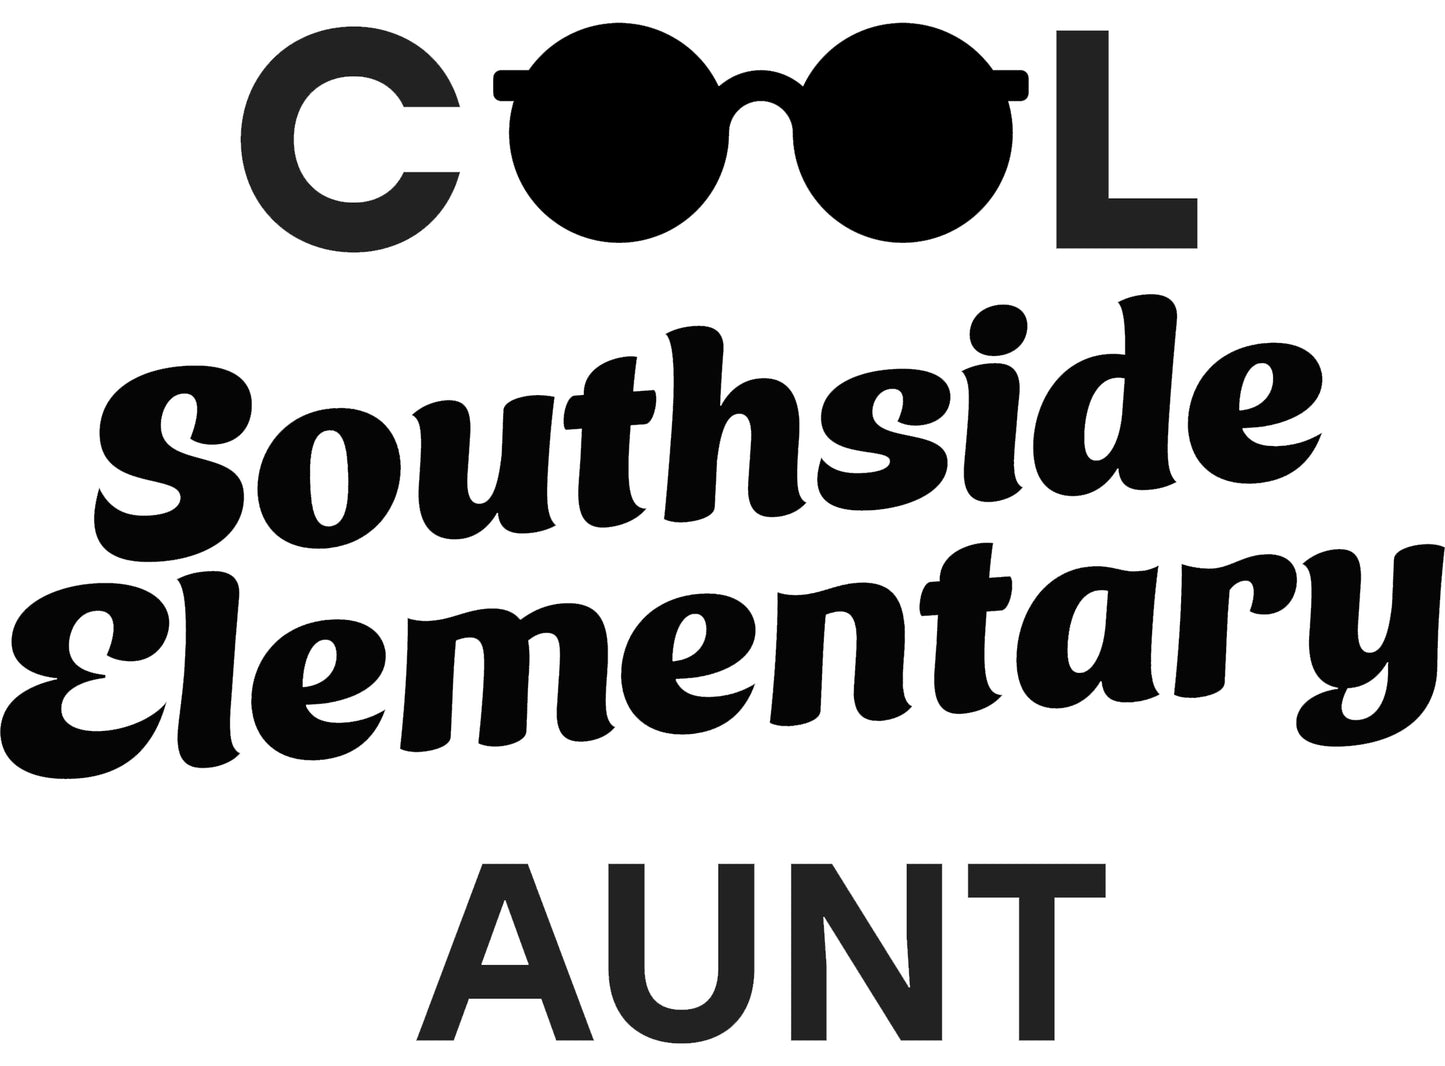 Cool Southside Elementary Aunt